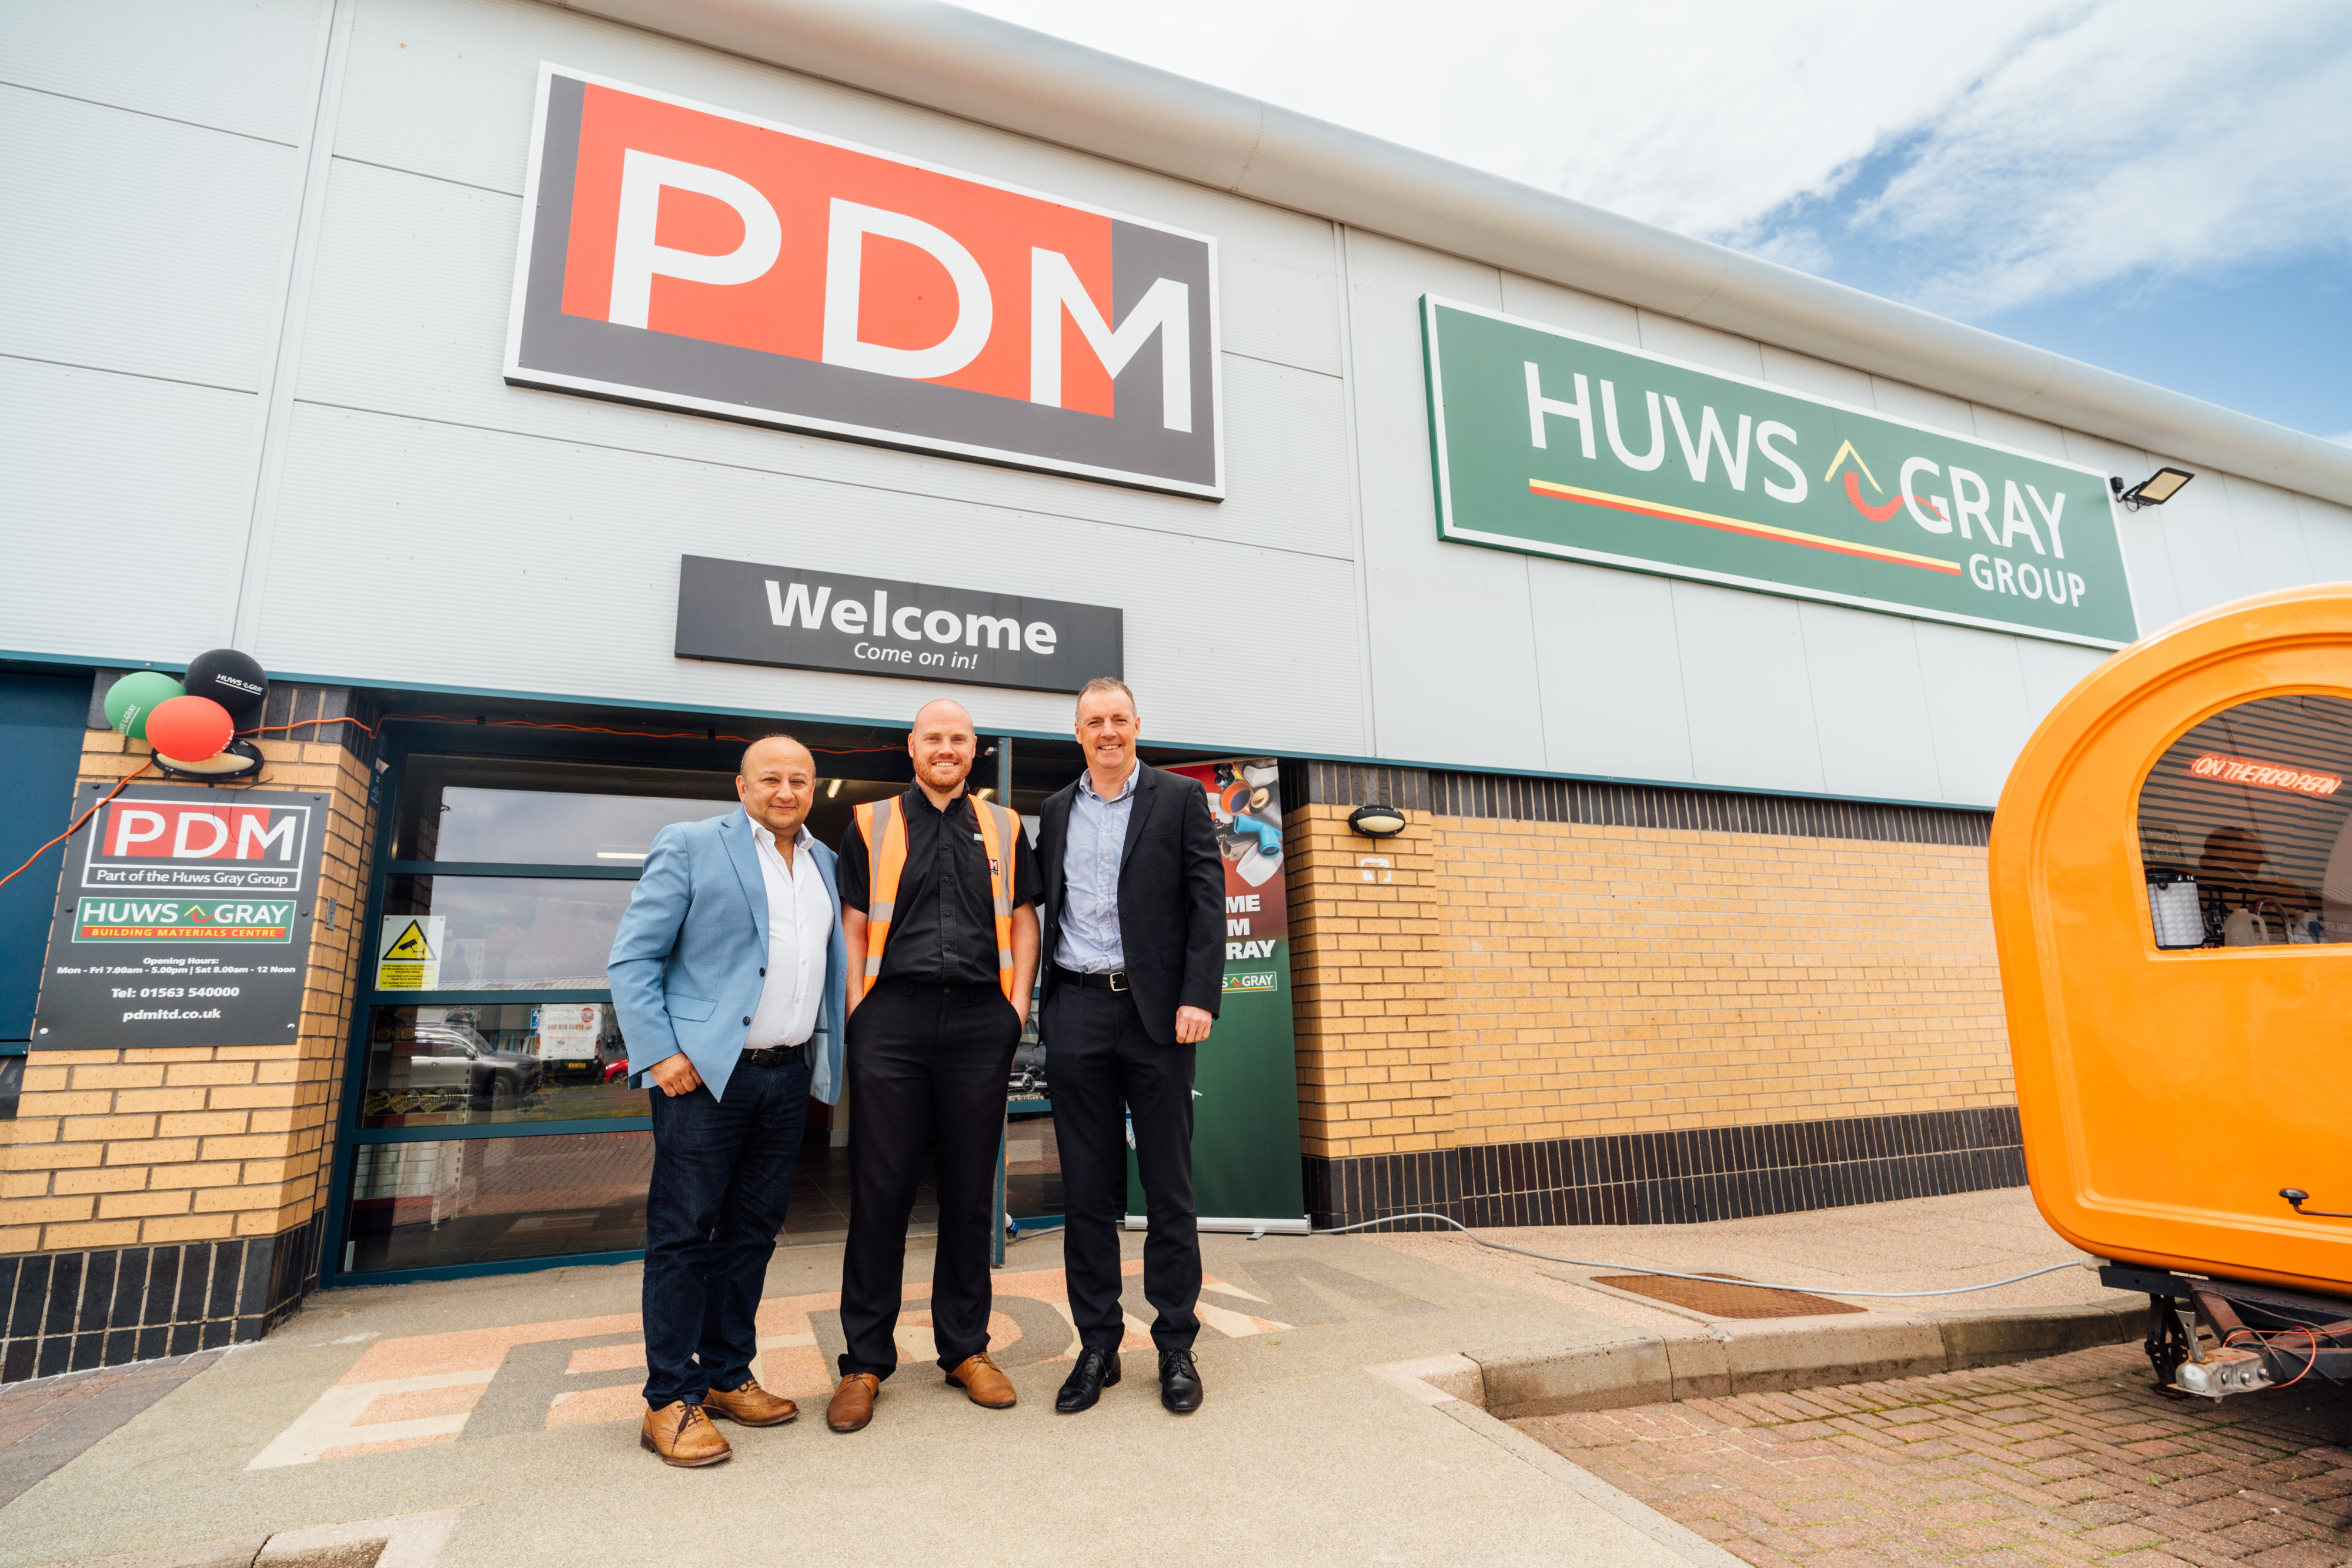 Building materials merchant PDM unveils six-figure investment in Kilmarnock branch